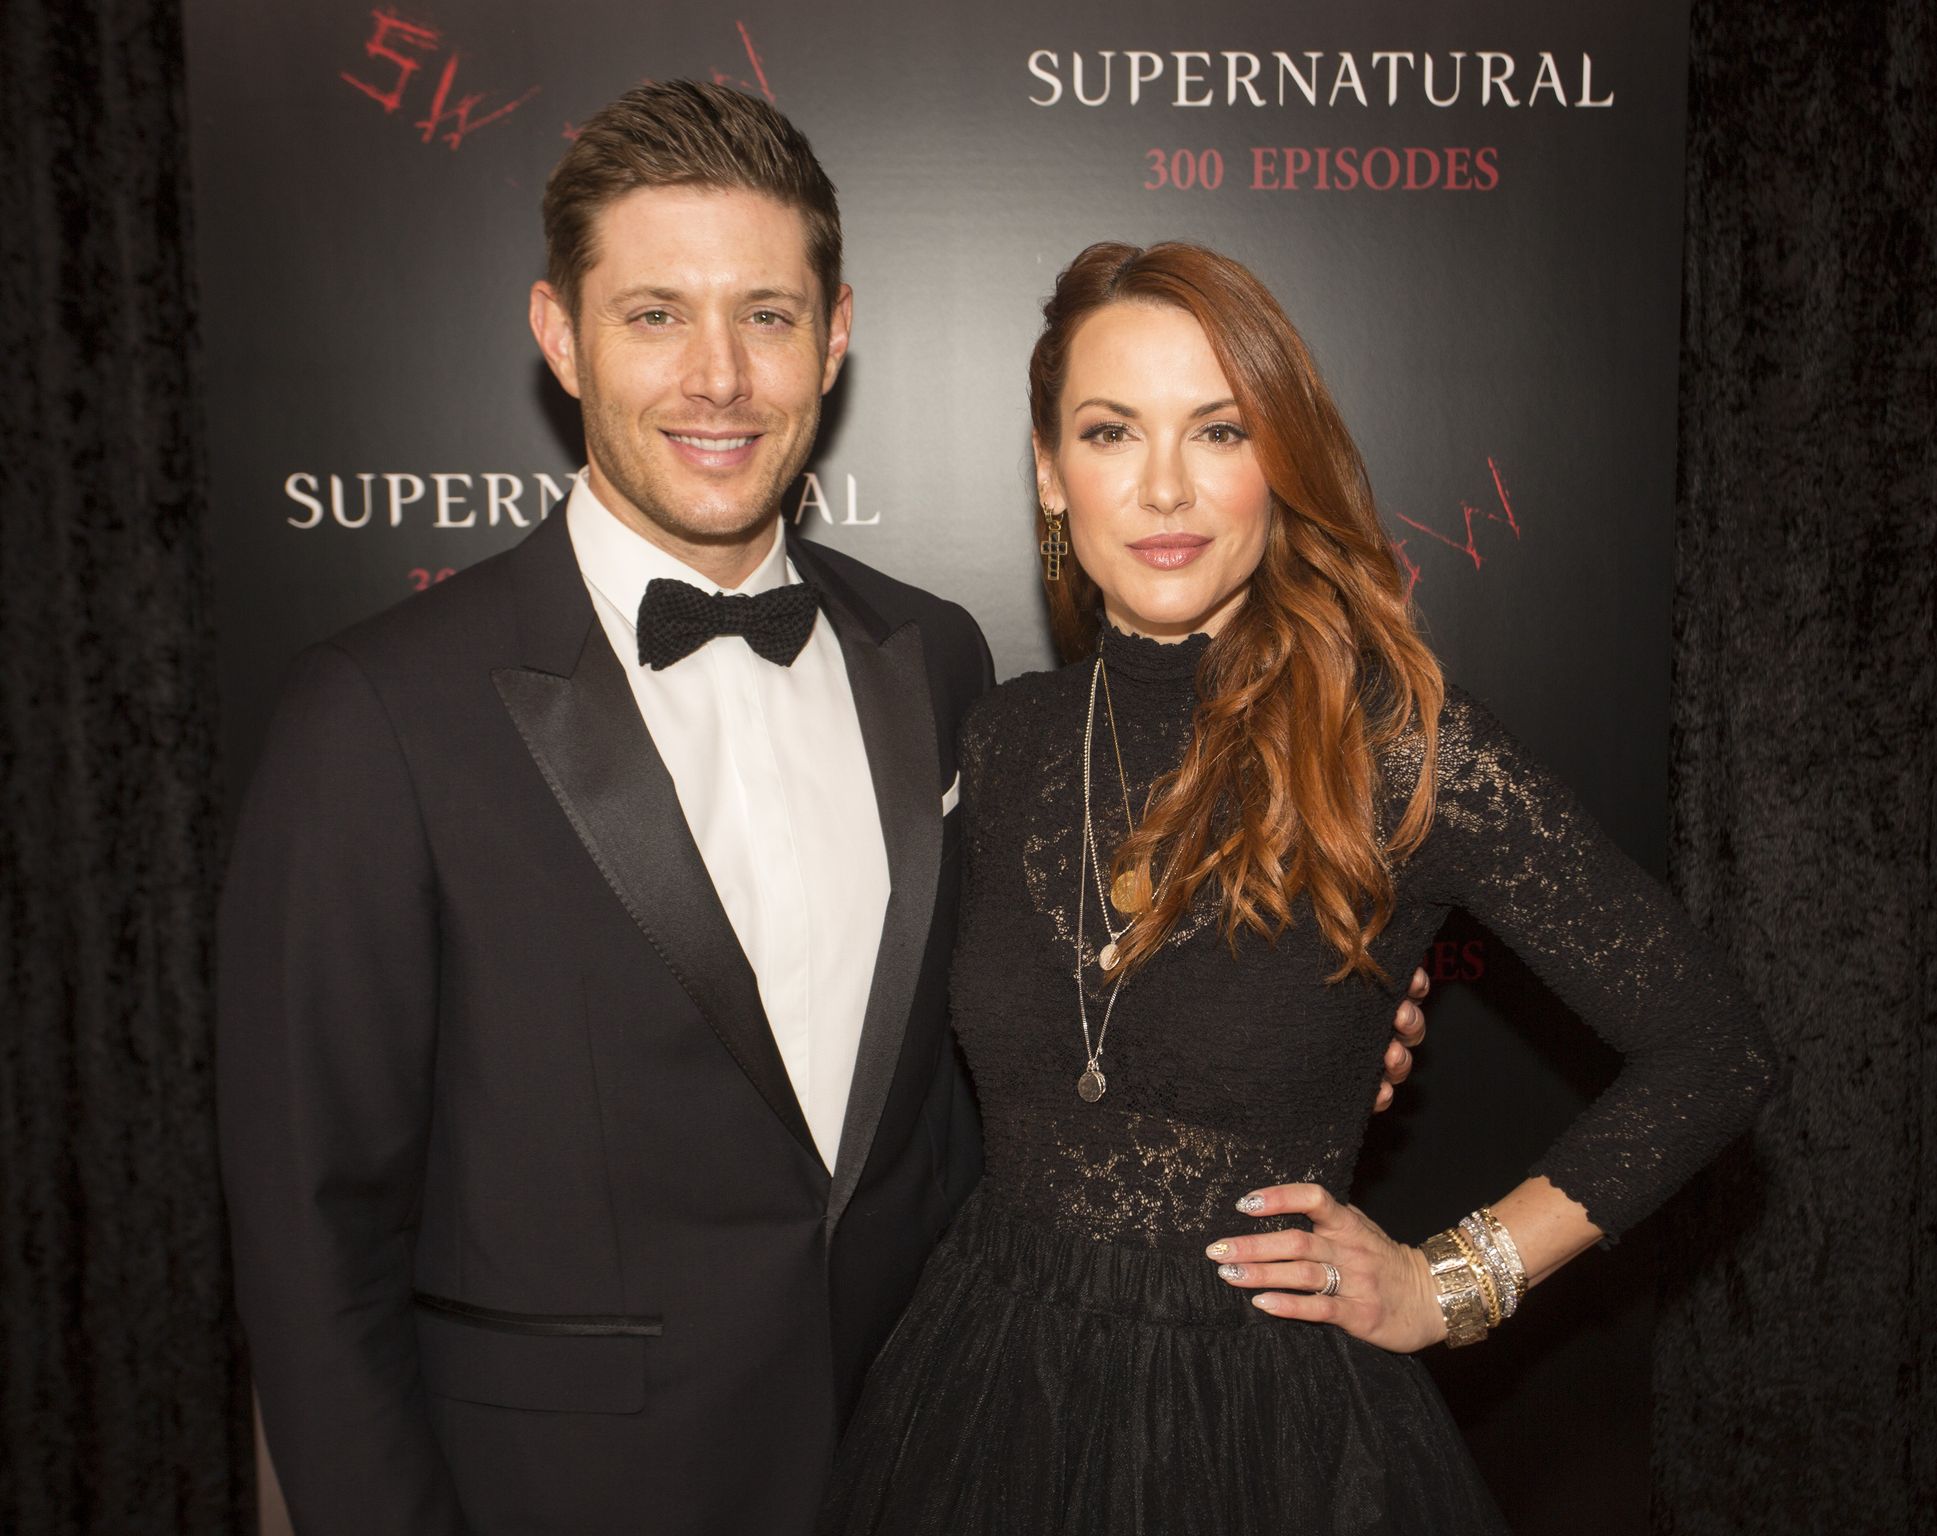  Jensen Ackles and Danneel Ackles at the red carpet at the "SUPERNATURAL" 300TH Episode Celebration in 2018 | Photo: Getty Images